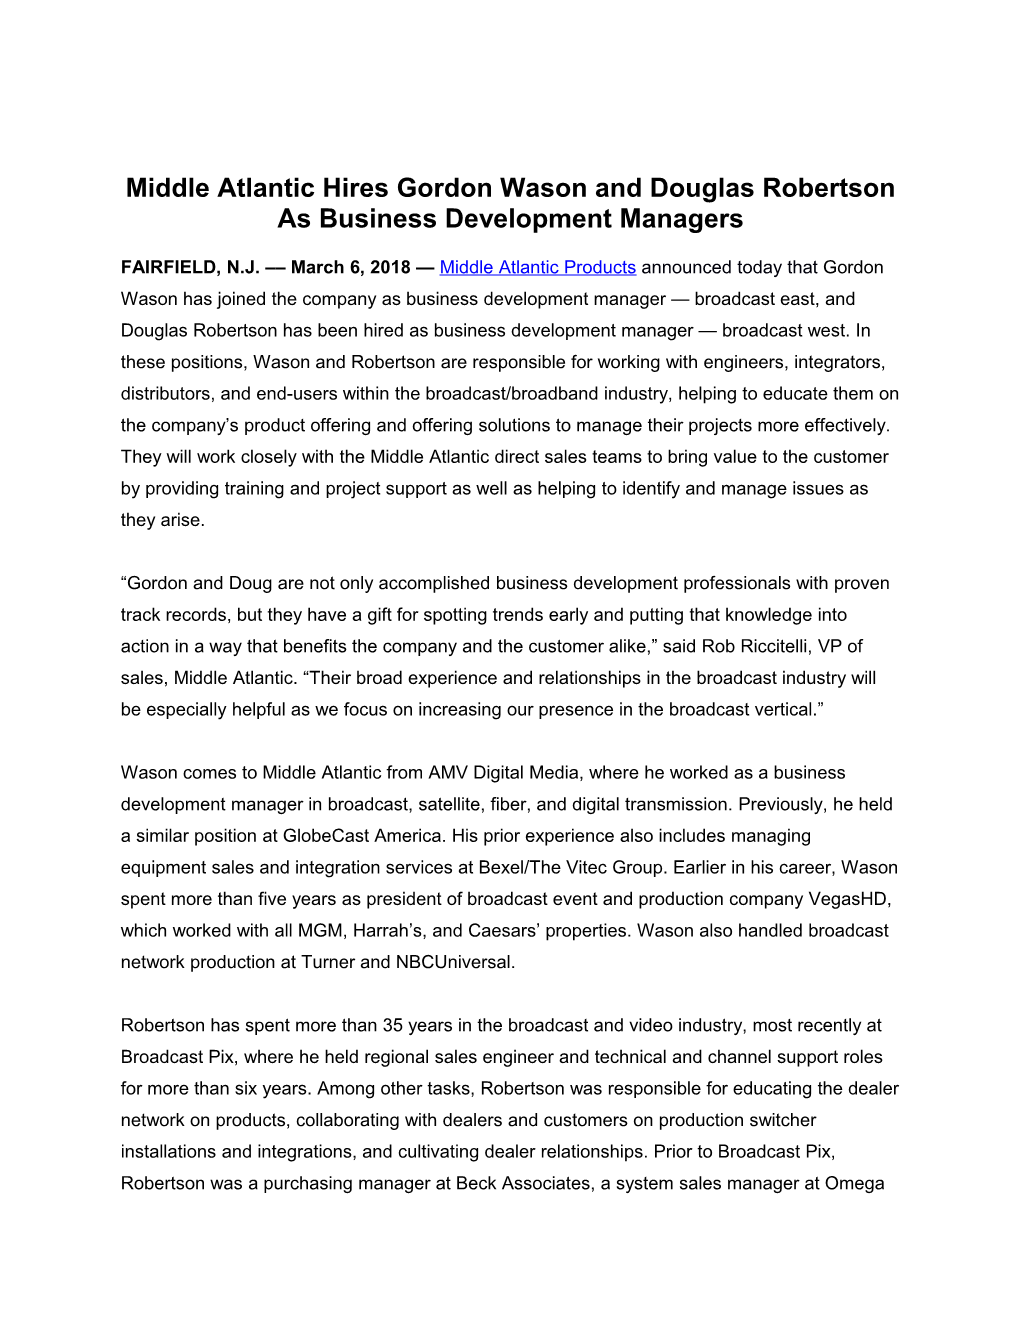 Middle Atlantic Hires Gordon Wason and Douglas Robertson As Business Development Managers